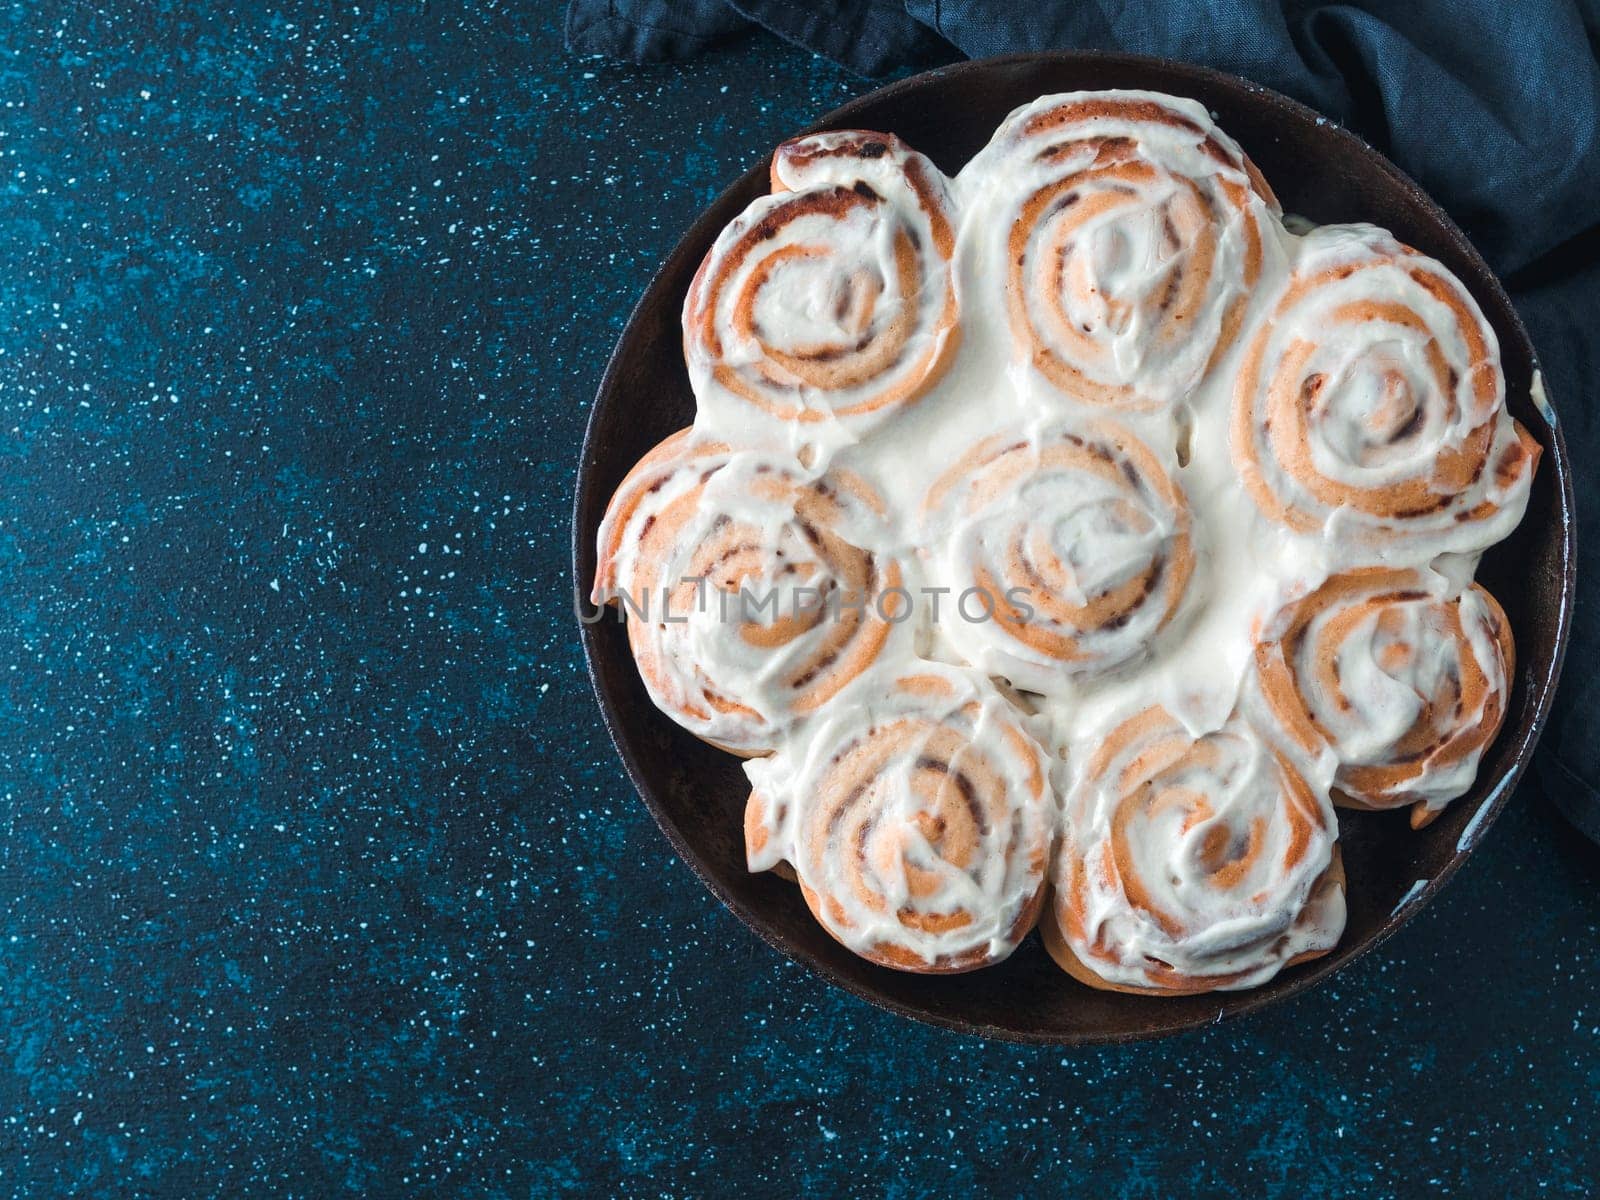 Vegan cinnamon rolls with topping, top view by fascinadora